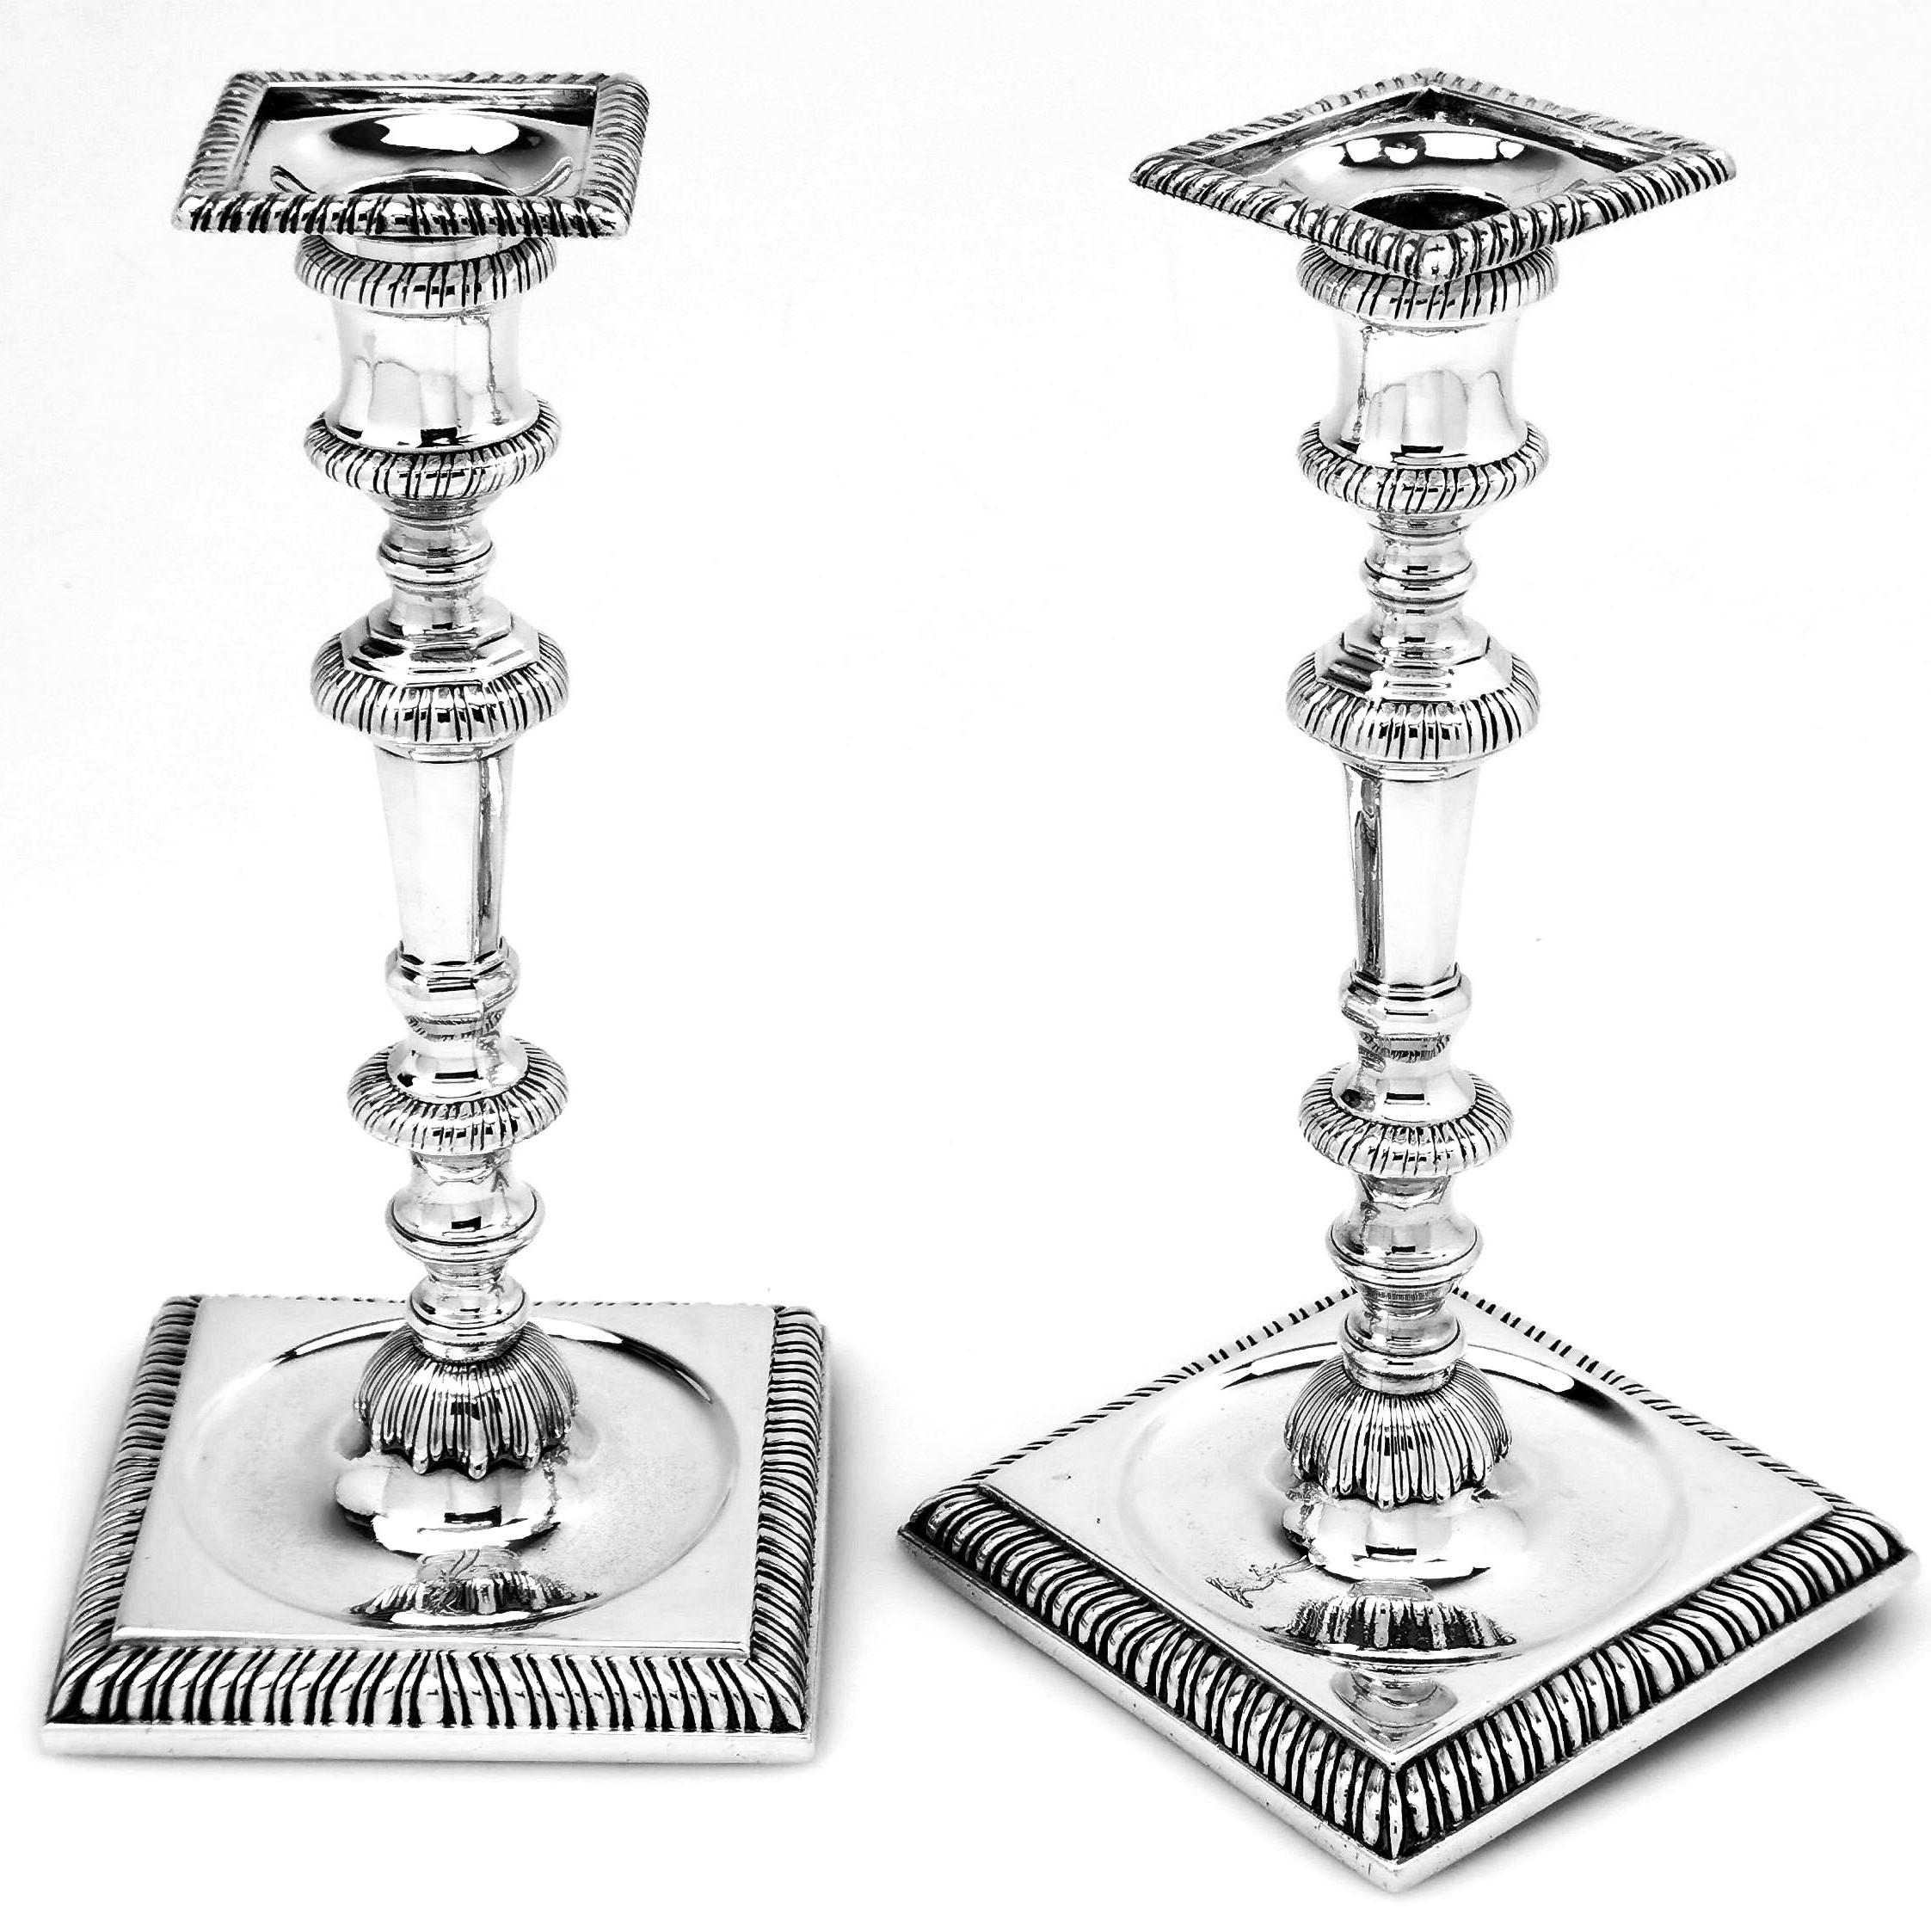 An impressive pair of Classic Antique George II solid Silver Candlesticks. These Georgian cast Silver Candlesticks have square bases with sunken wells and knopped columns with removable square silver sconces. The edges of the bases, knopped columns